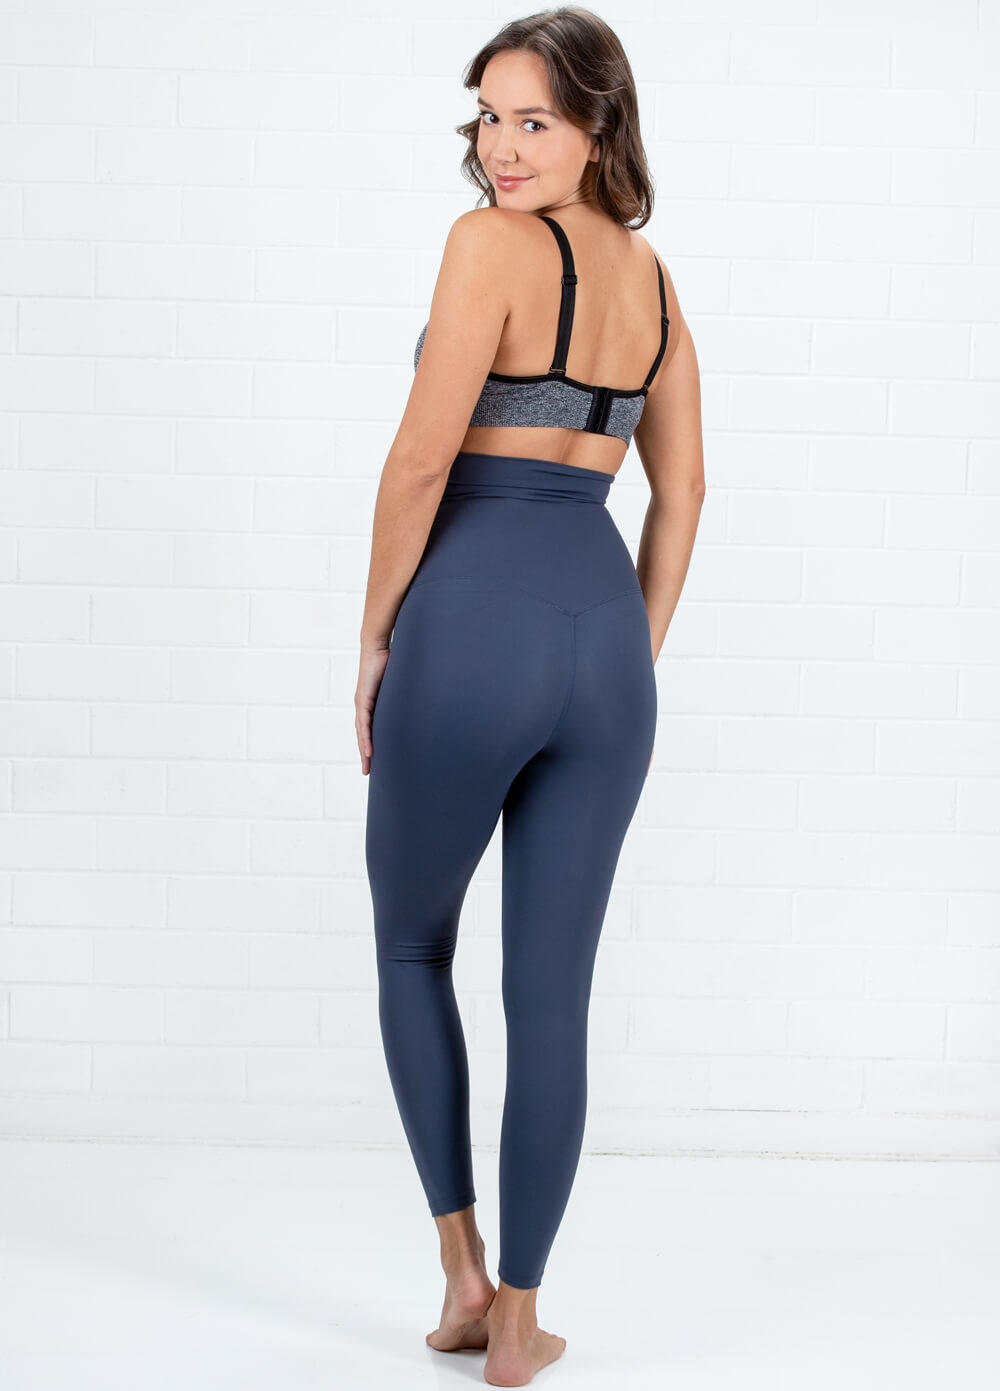 Queen Bee - Jenna High Waist Active Shaping Tights in Aegean Blue